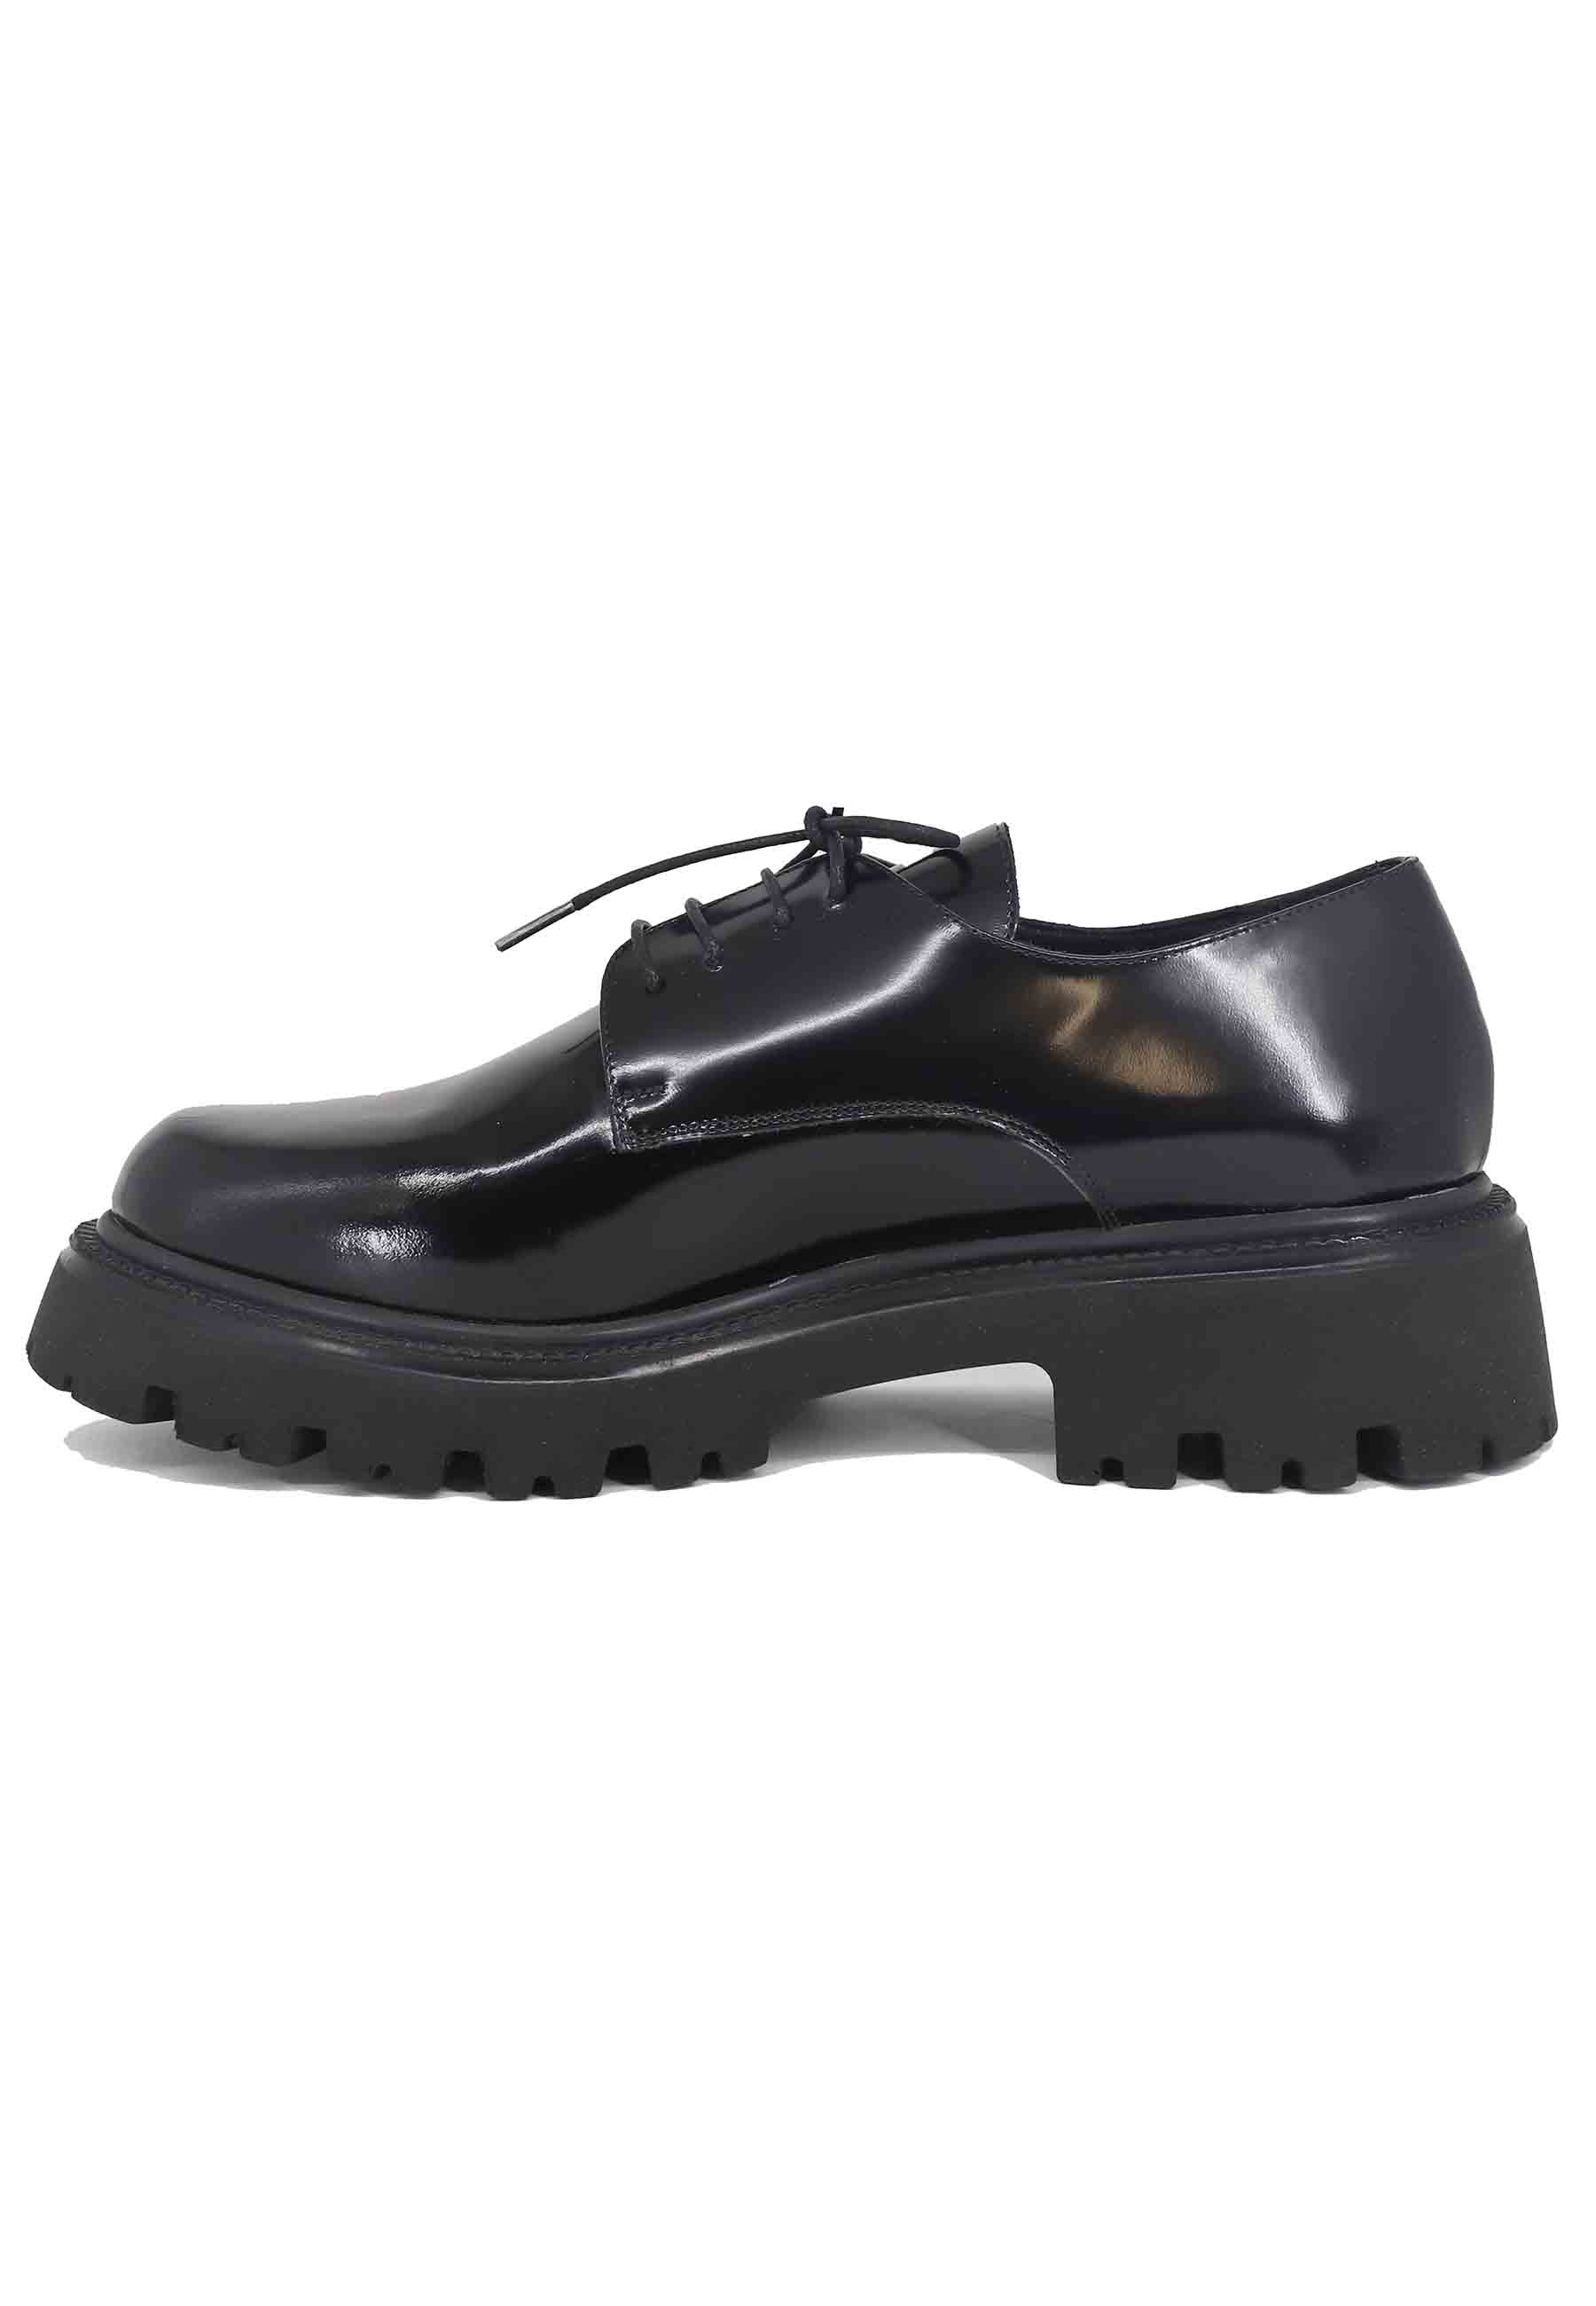 Women's lace-ups in black shiny leather with round toe